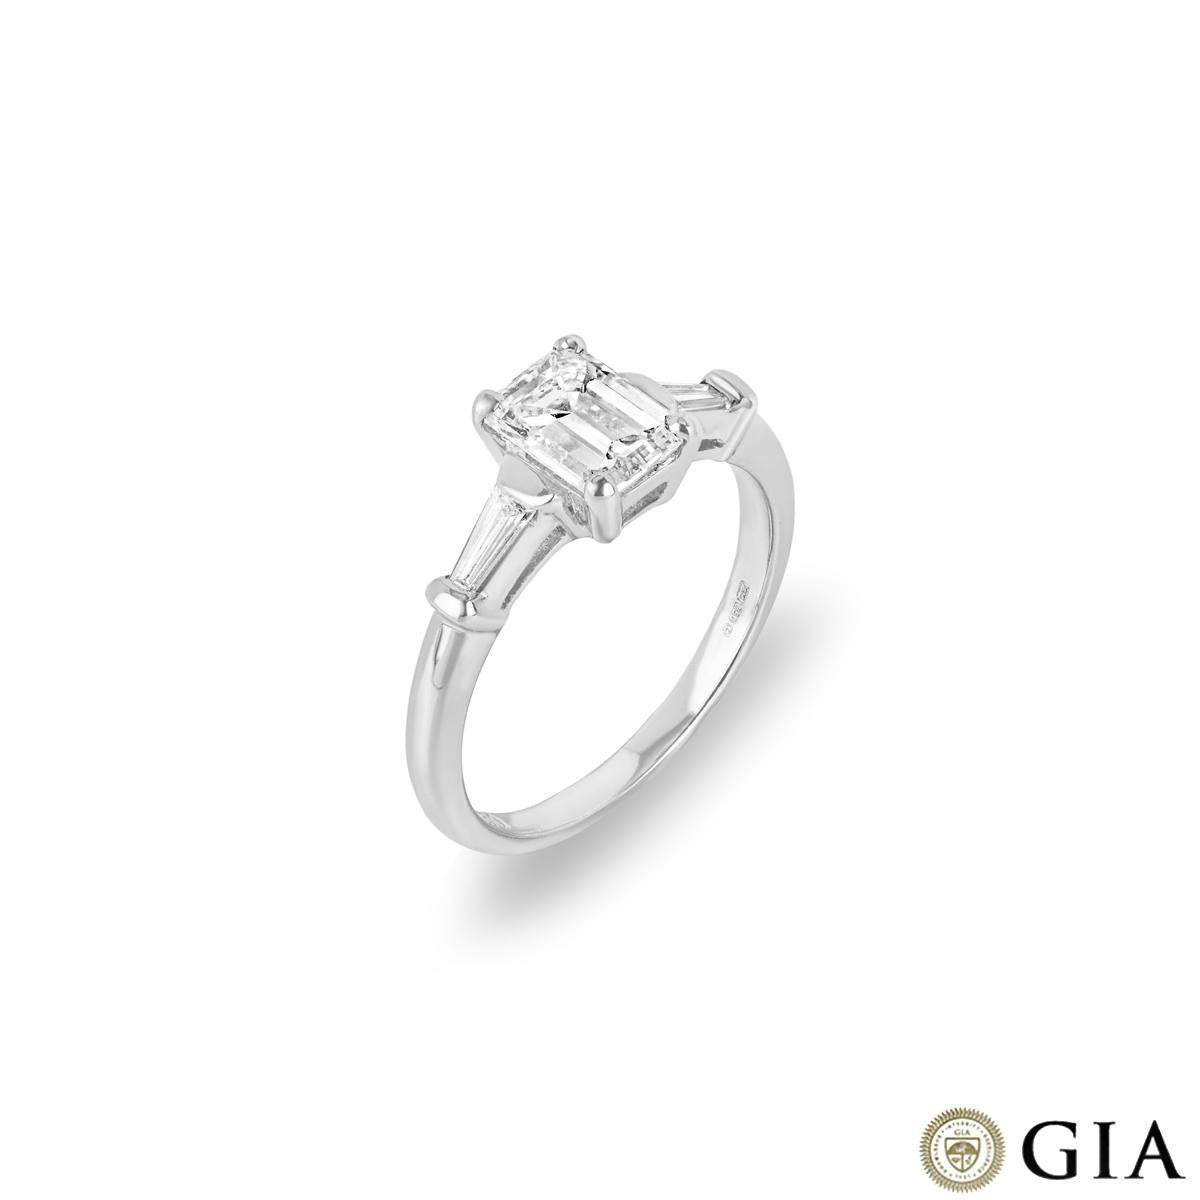 A modern 18k white gold diamond three-stone ring. The engagement ring is set to the centre with an emerald cut diamond weighing 1.00ct, F colour and VS1 clarity. Accentuating the centre diamond are 2 tapered baguettes tension set to the shoulders